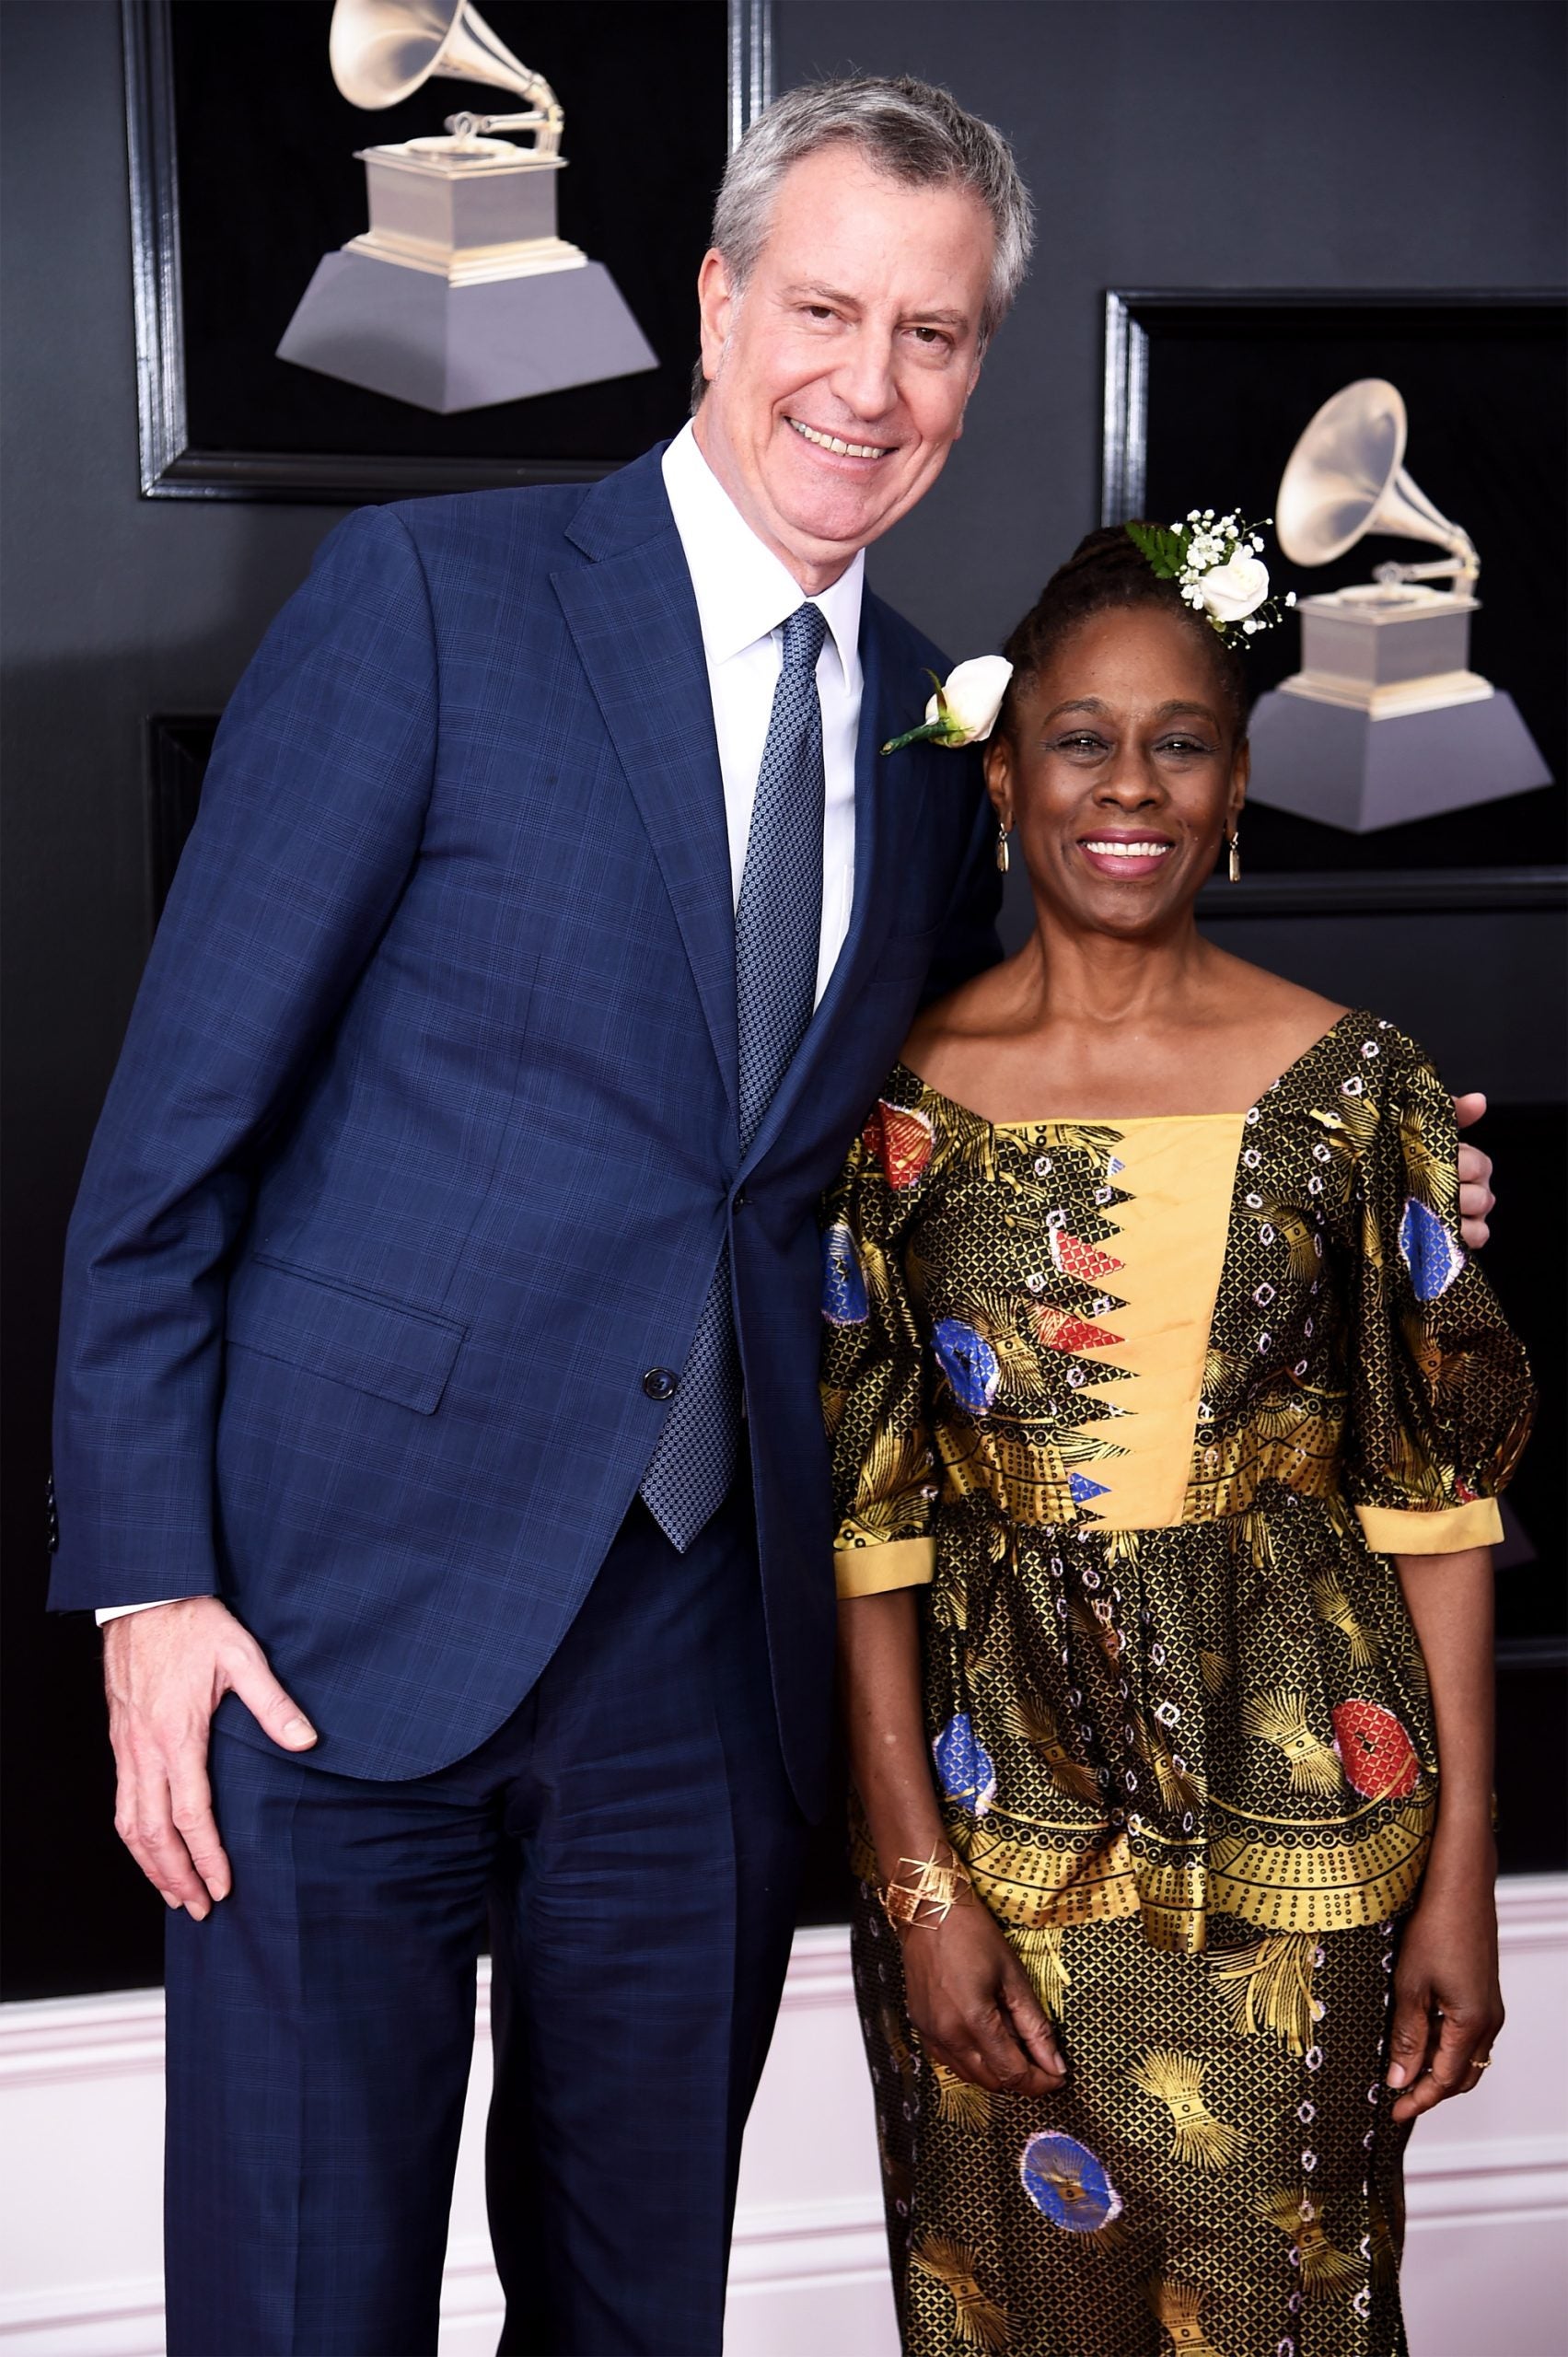 8 Times The Former NYC Mayor Bill de Blasio And His Wife Showcased Their Love